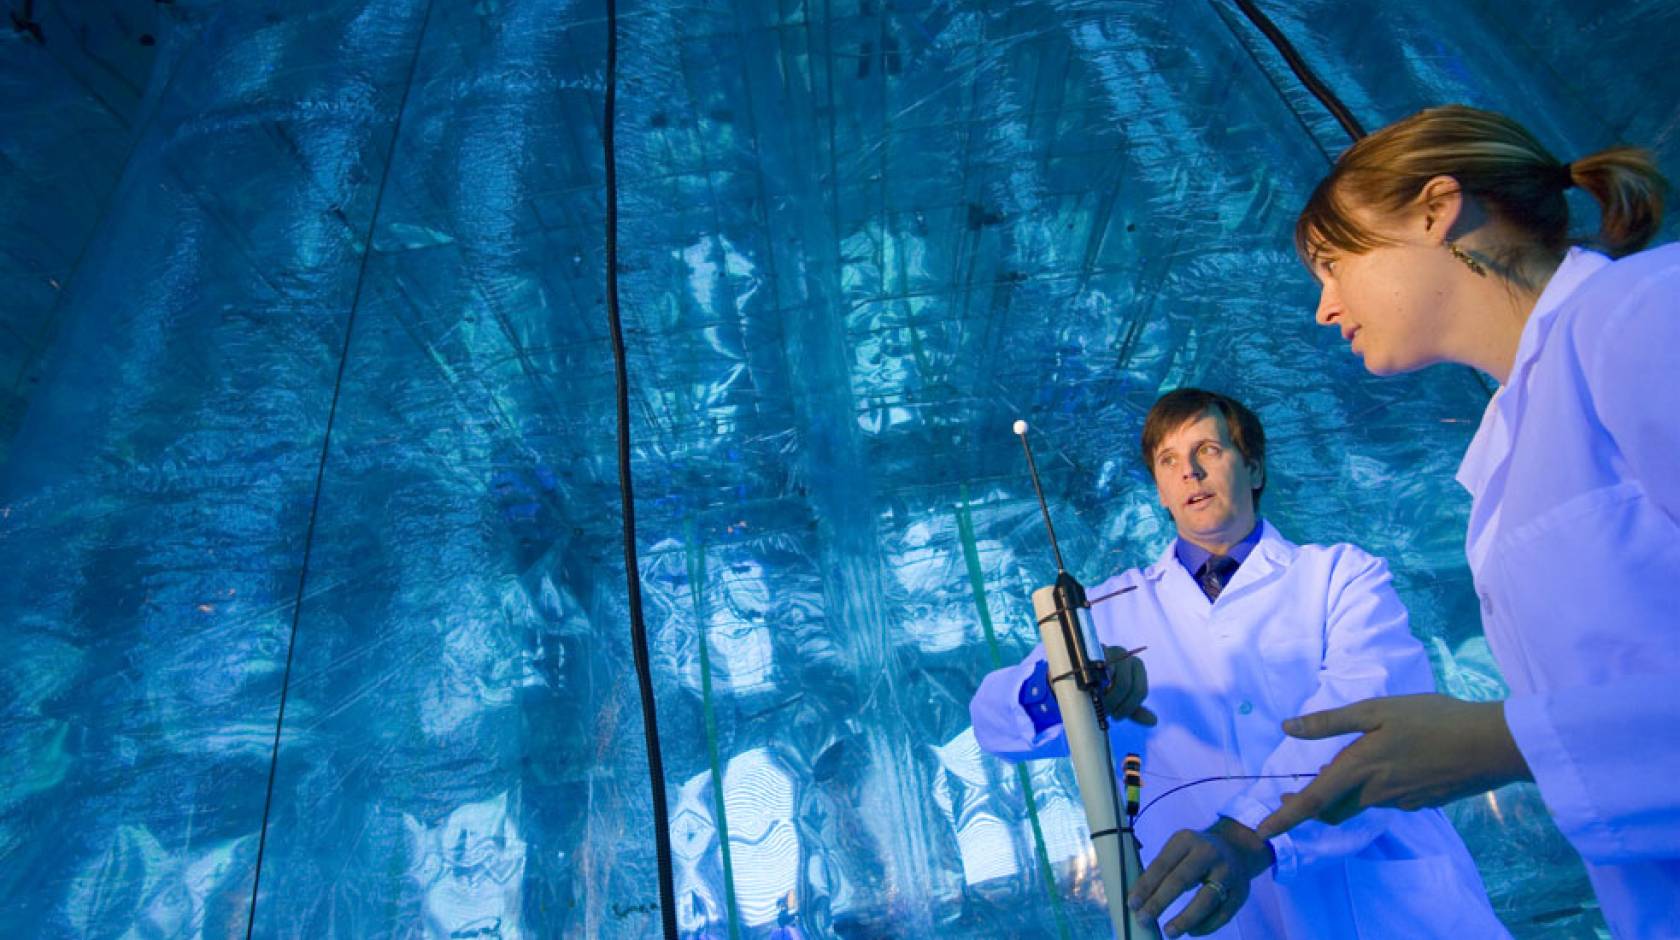 Two researchers in a lab with a bright blue glowing wall